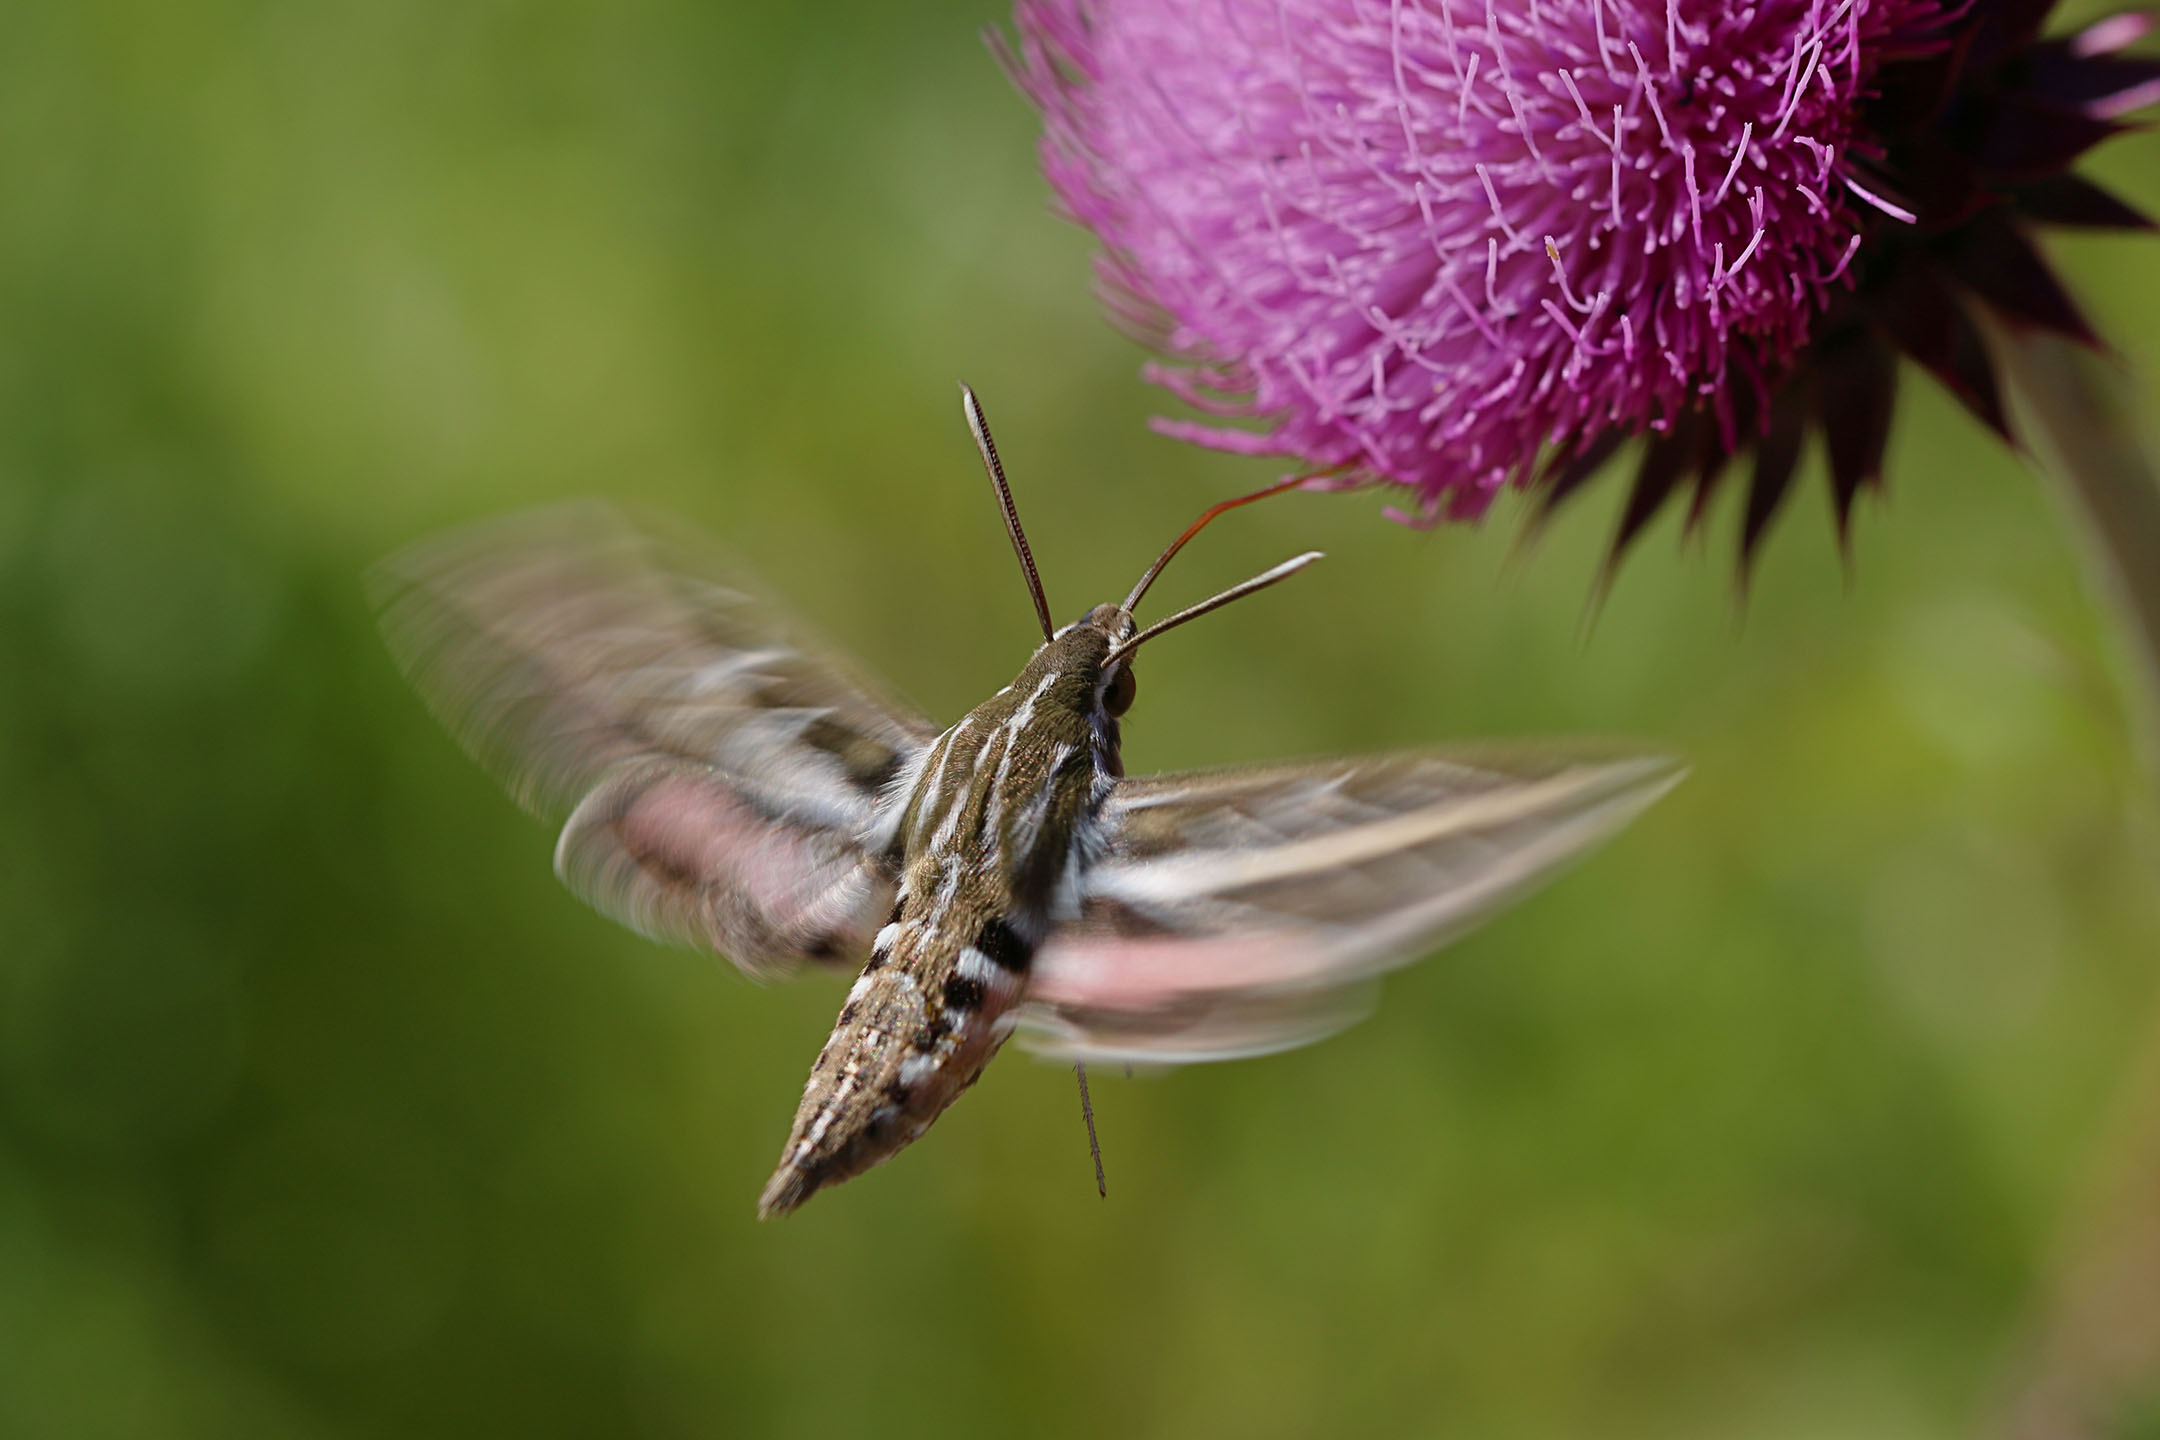 The white-lined sphinx moth